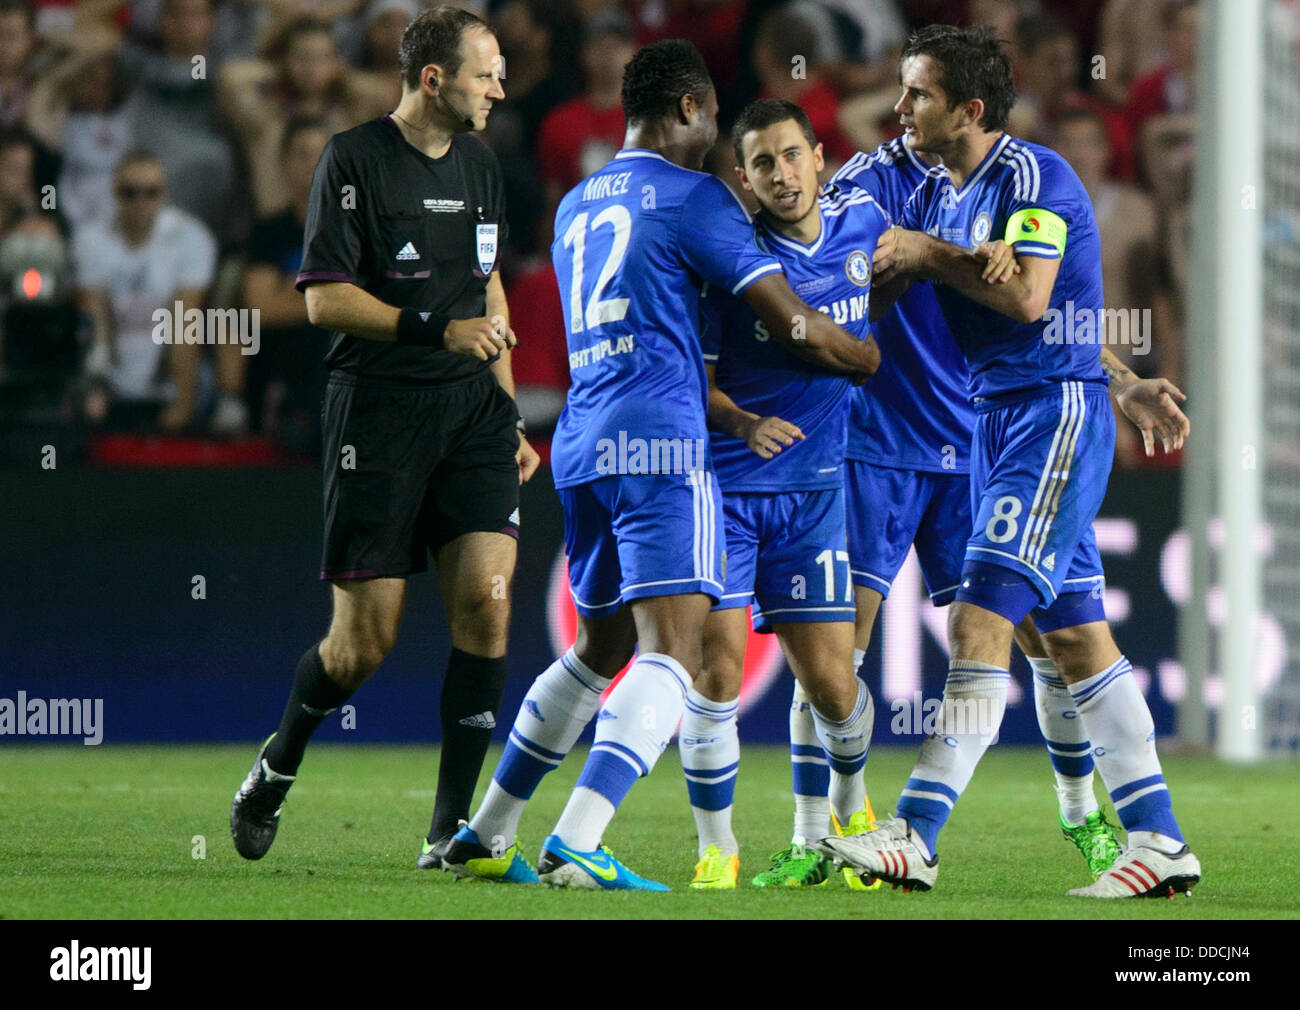 Super Cup soccer match FC Chelsea vs FC Bayern Munich, Prague, Czech Republic, August 30, 2013. Eden Hazard of Chelsea receives congratulations to a goal from his teammates, pictured left John Obi Mikel, pictured right Frank Lampard. (CTK Photo/Michal Kamaryt) Stock Photo